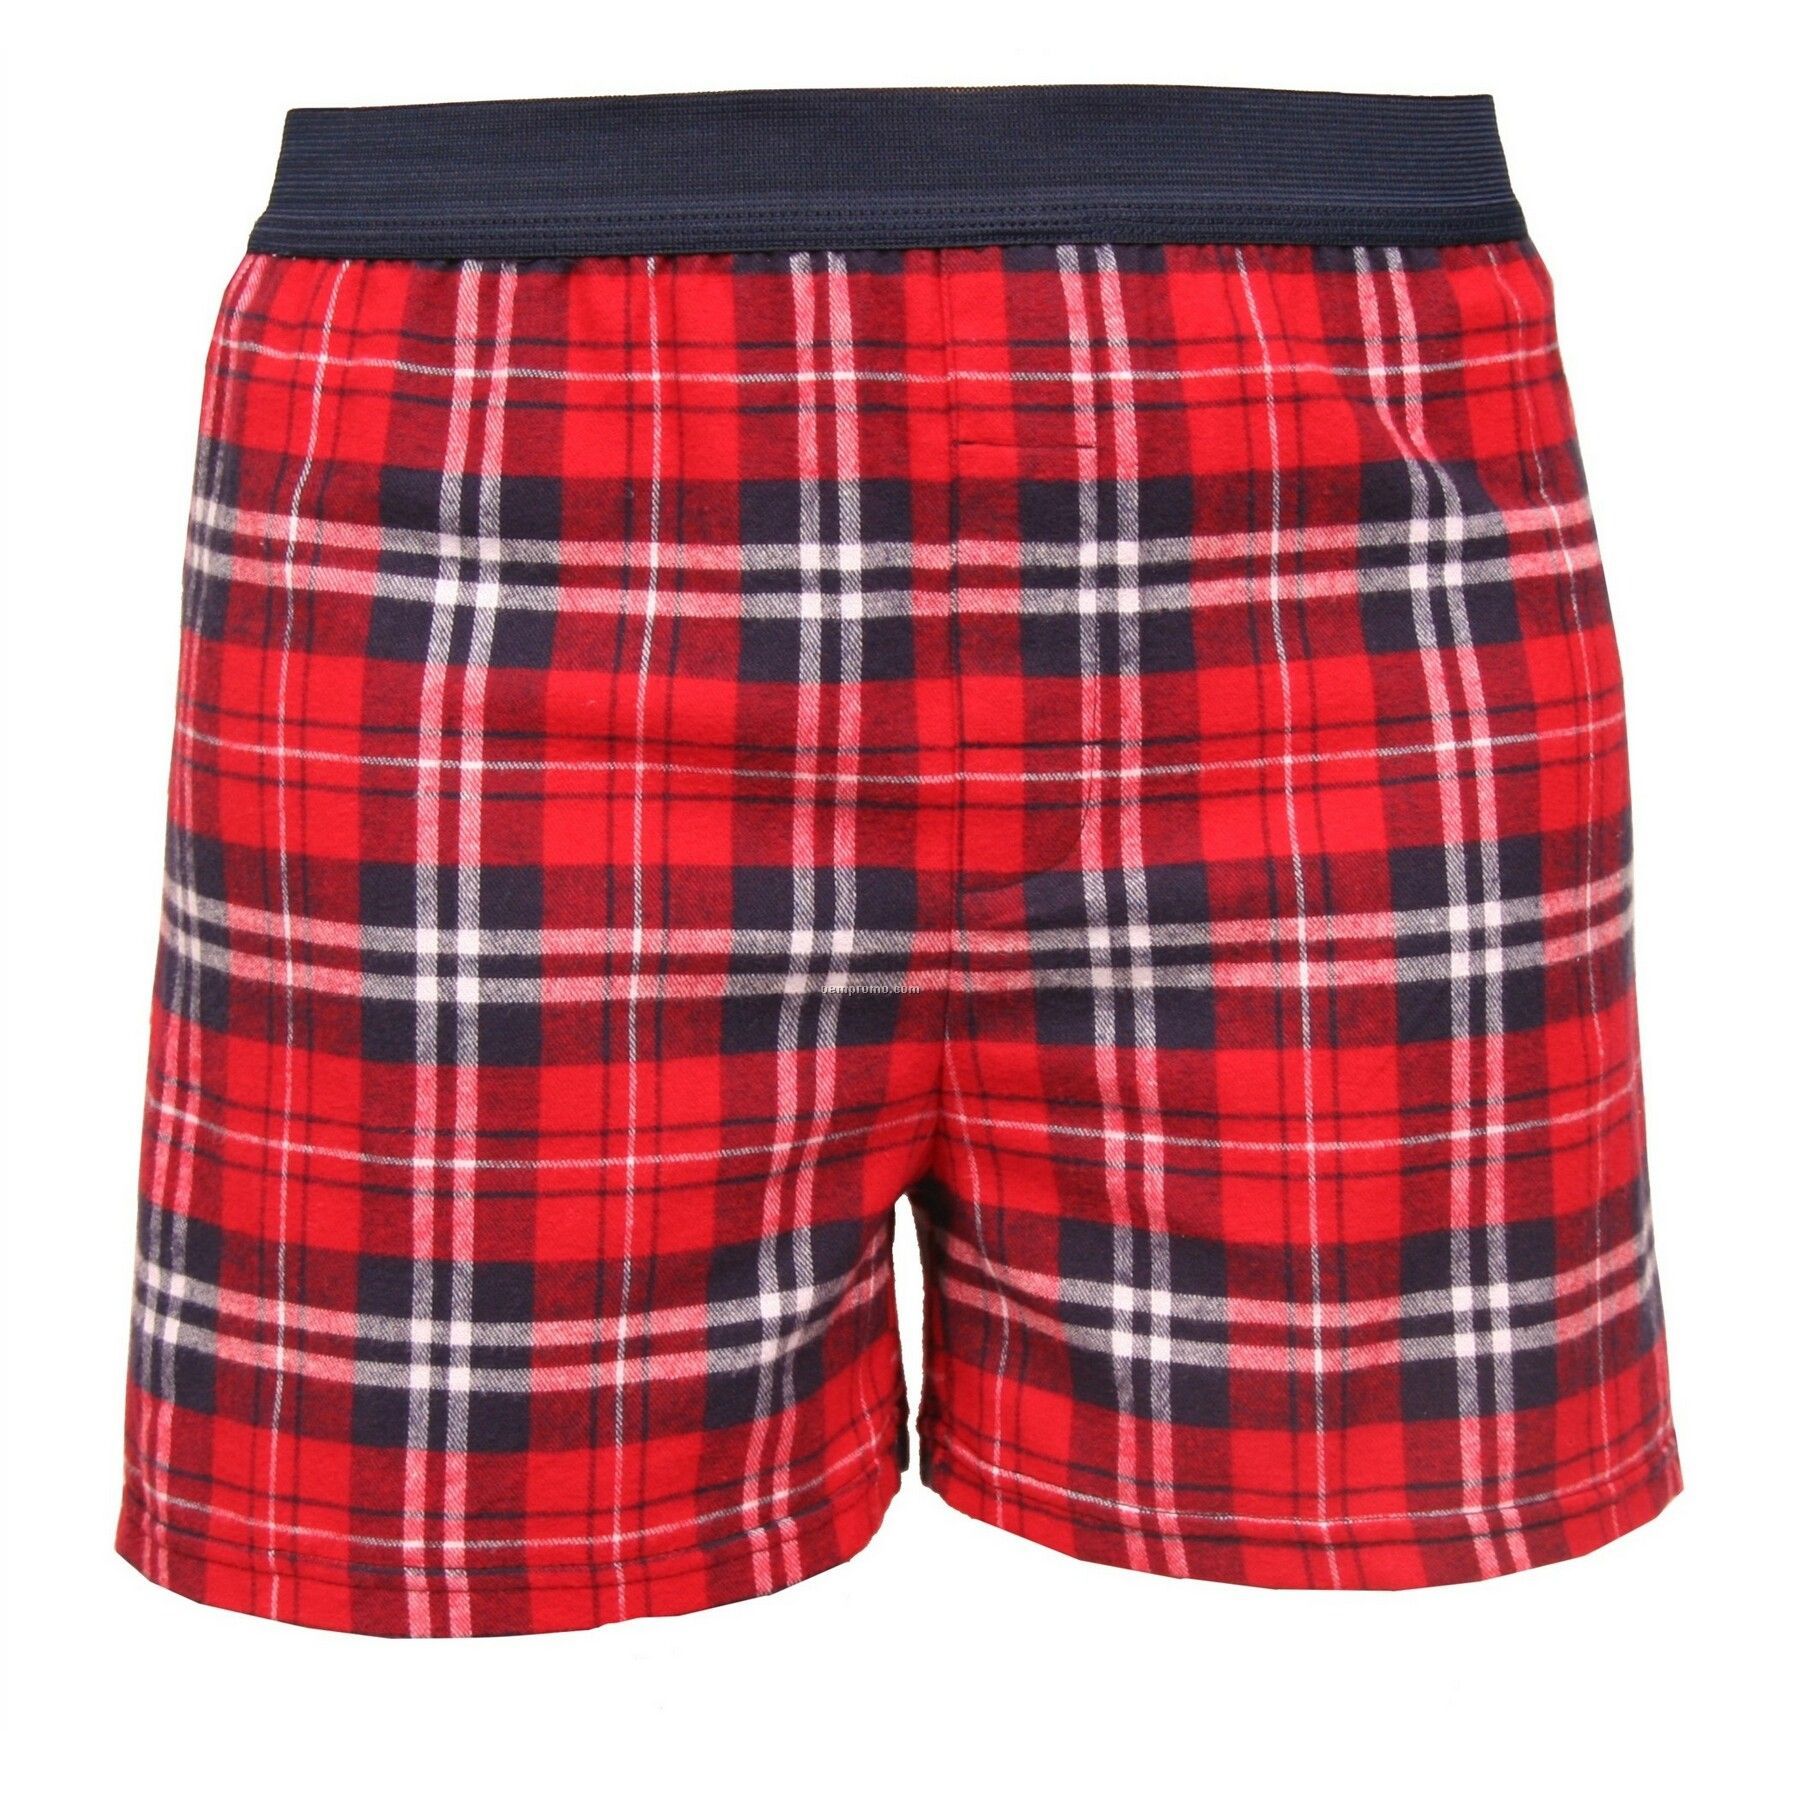 Adult Navy/Red Plaid Classic Boxer Short